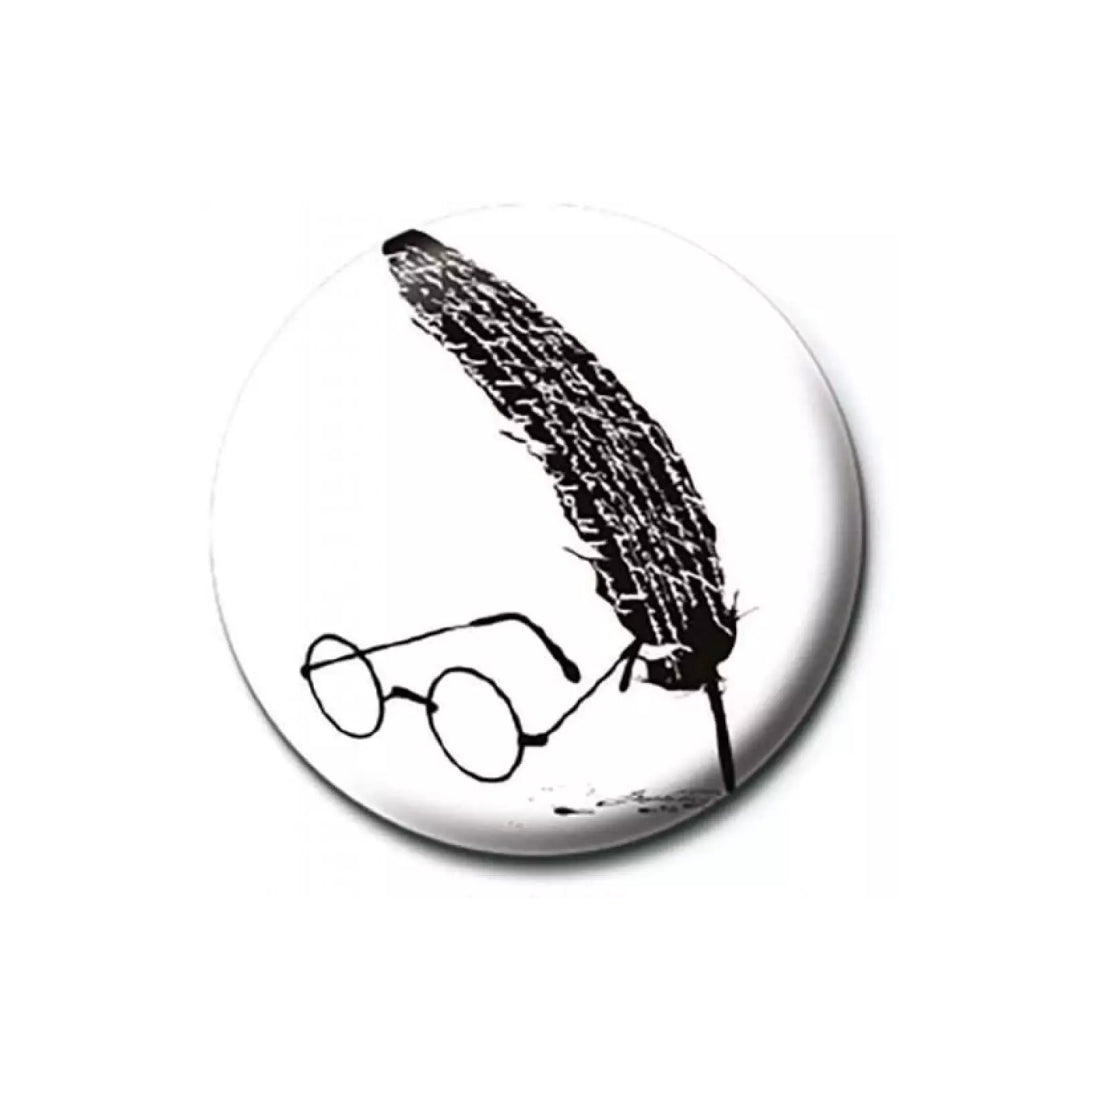 Harry Potter - Glasses & Feather Button Badge - أكسسوار - Store 974 | ستور ٩٧٤